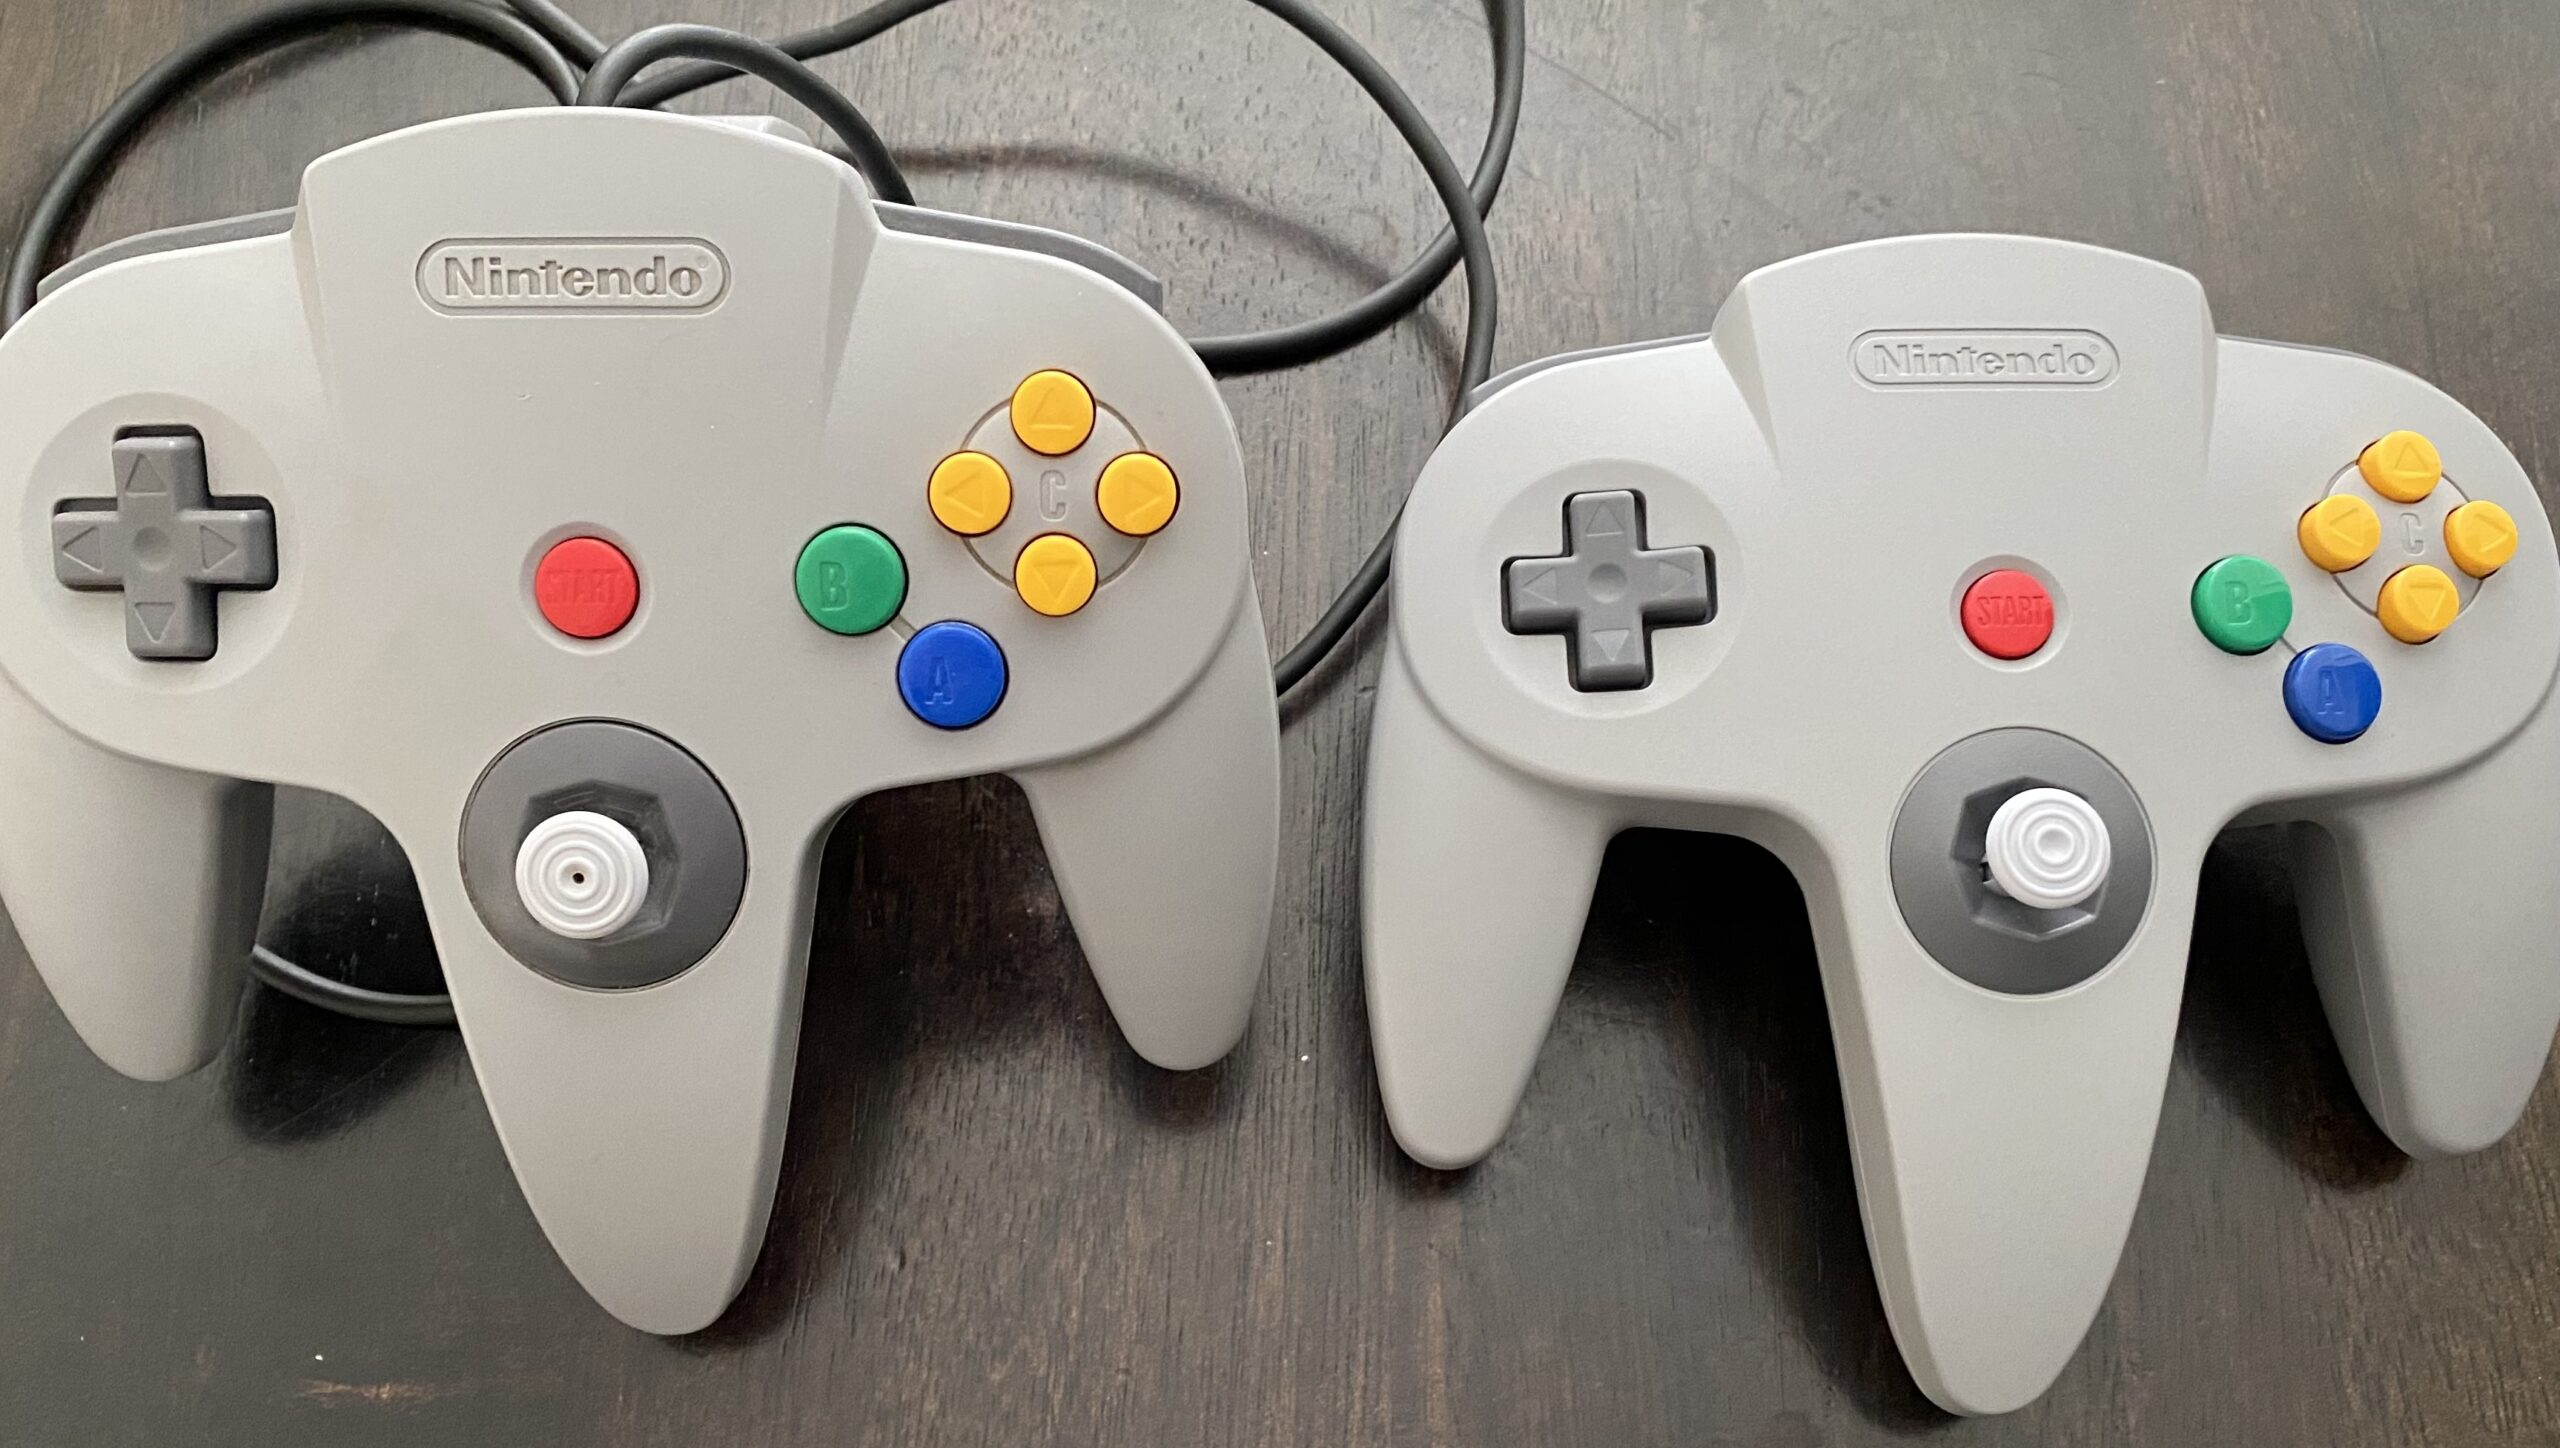 Hurtigt egyptisk Hej The Switch N64 controller is great, shame the Expansion Pack isn't